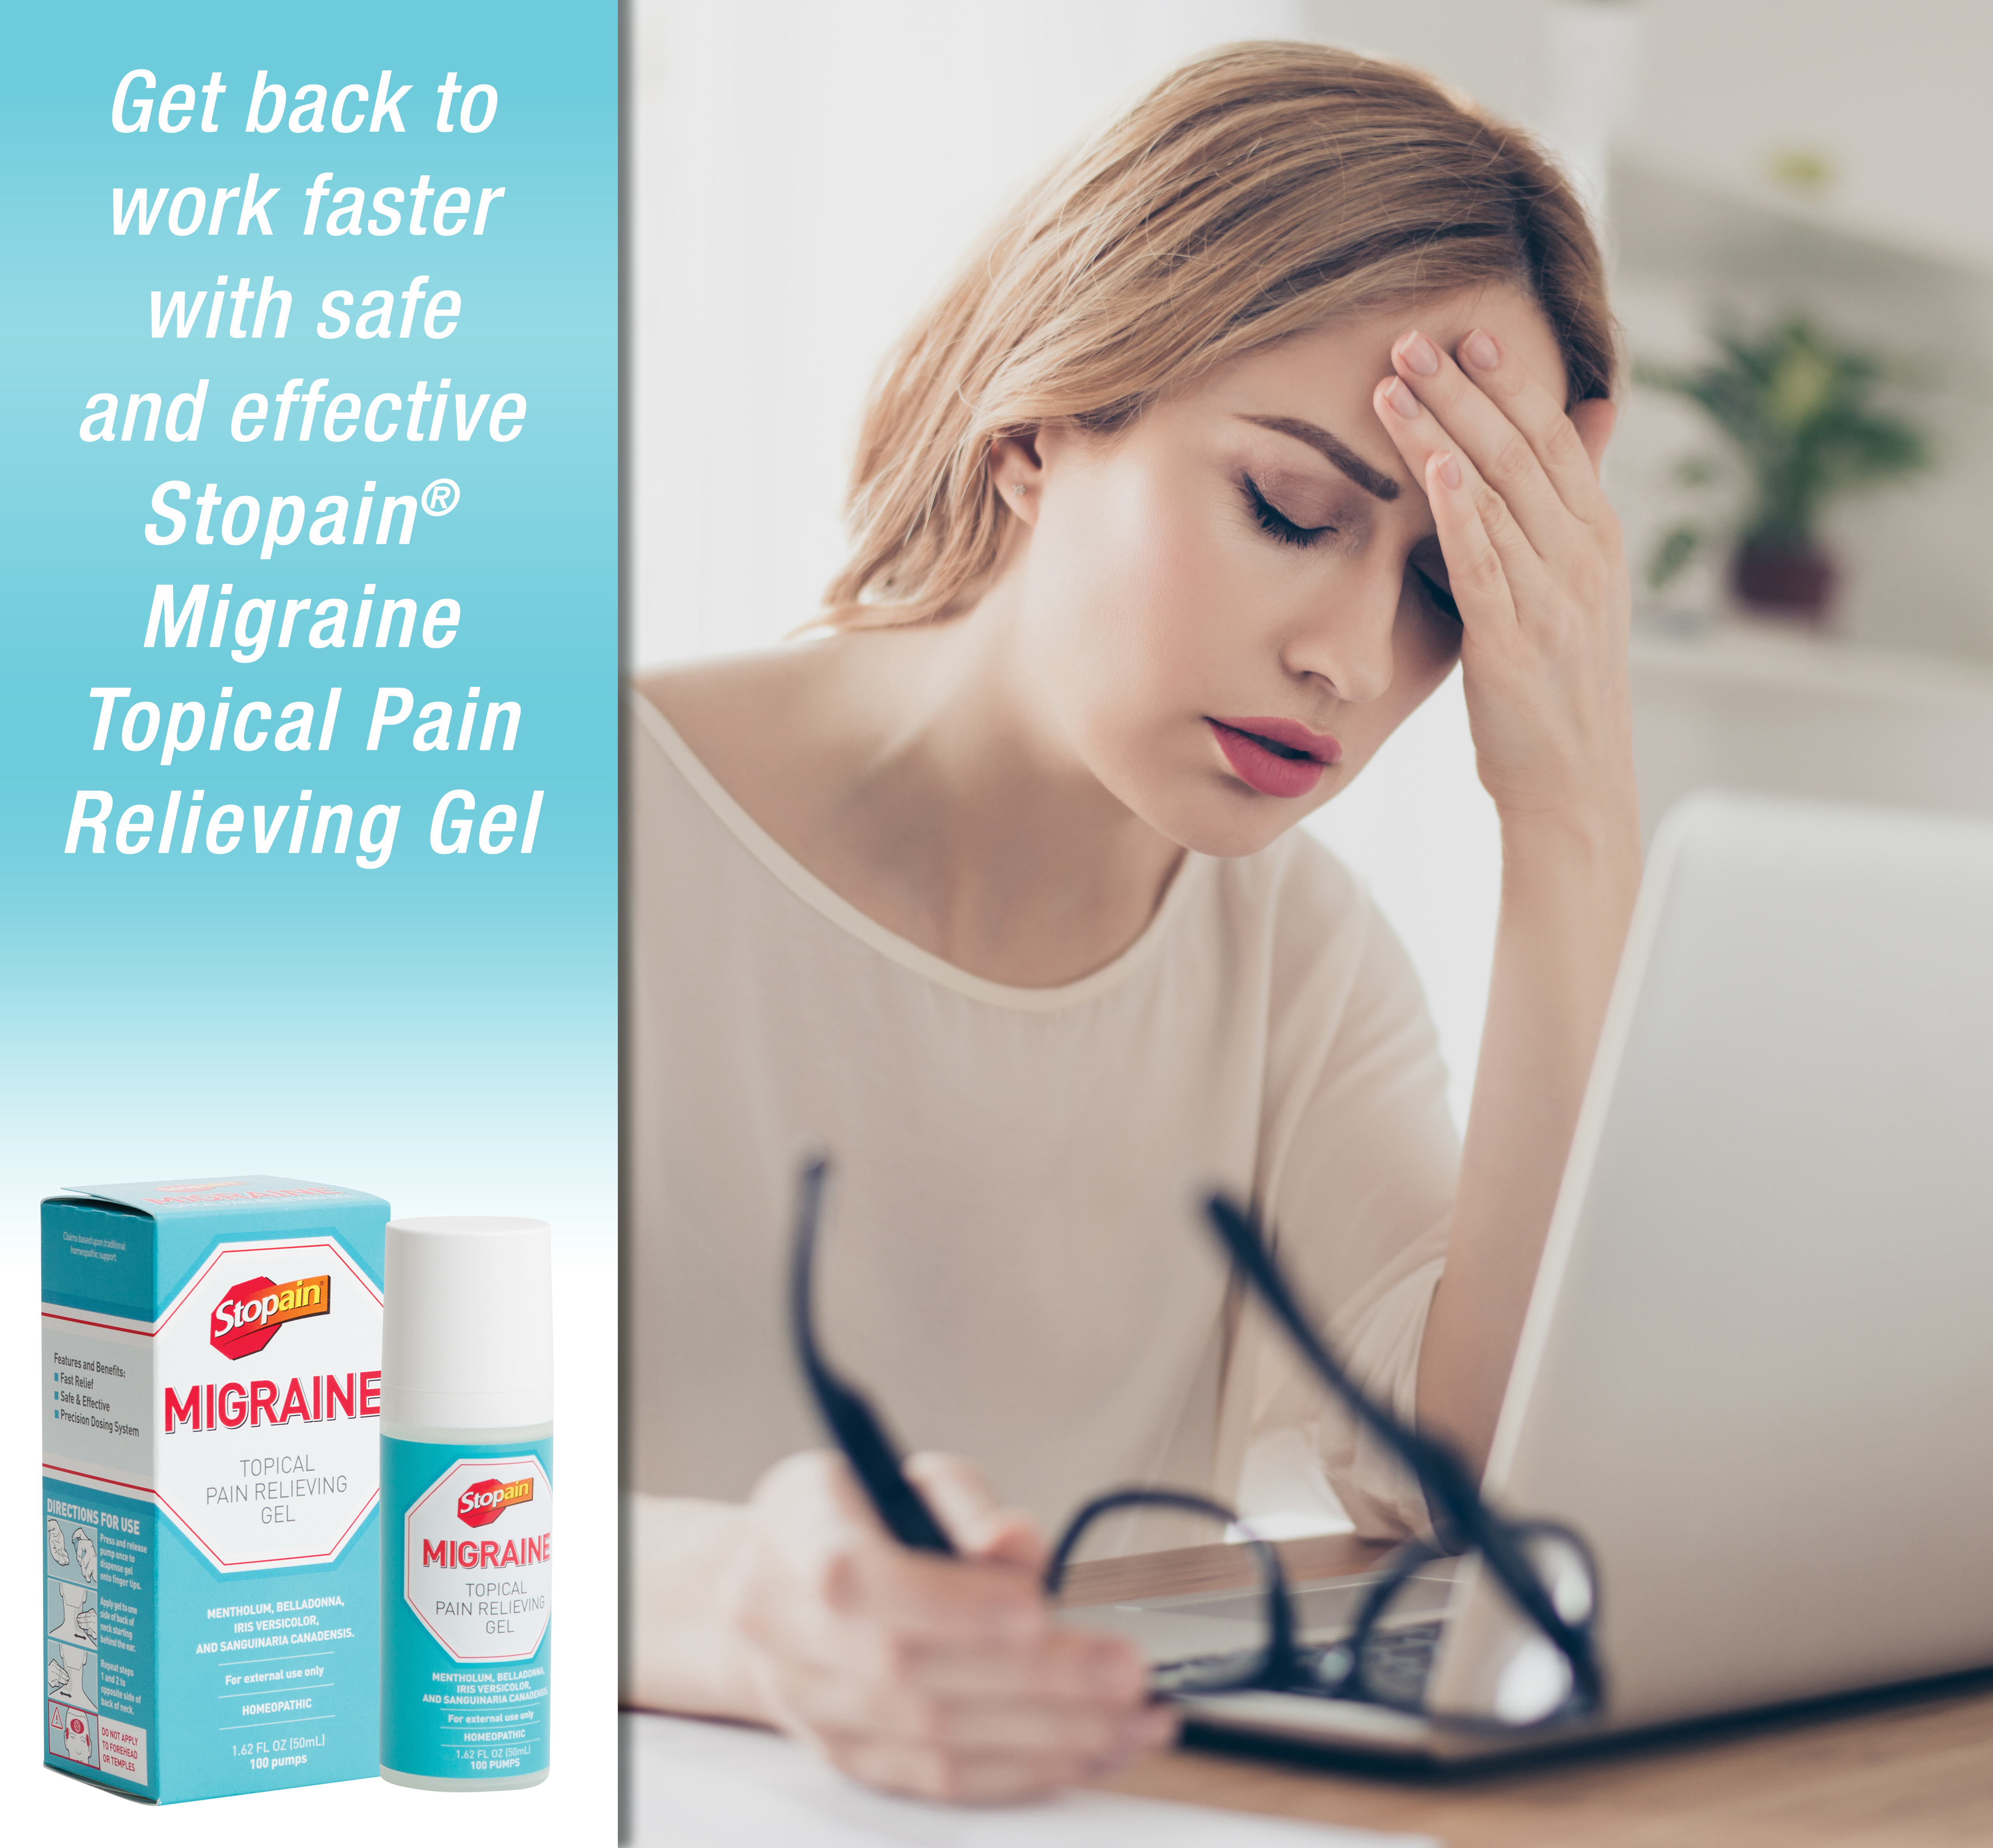 Stopain Migraine Topical Pain Relieving Gel, 1.62 fl oz - image 4 of 10